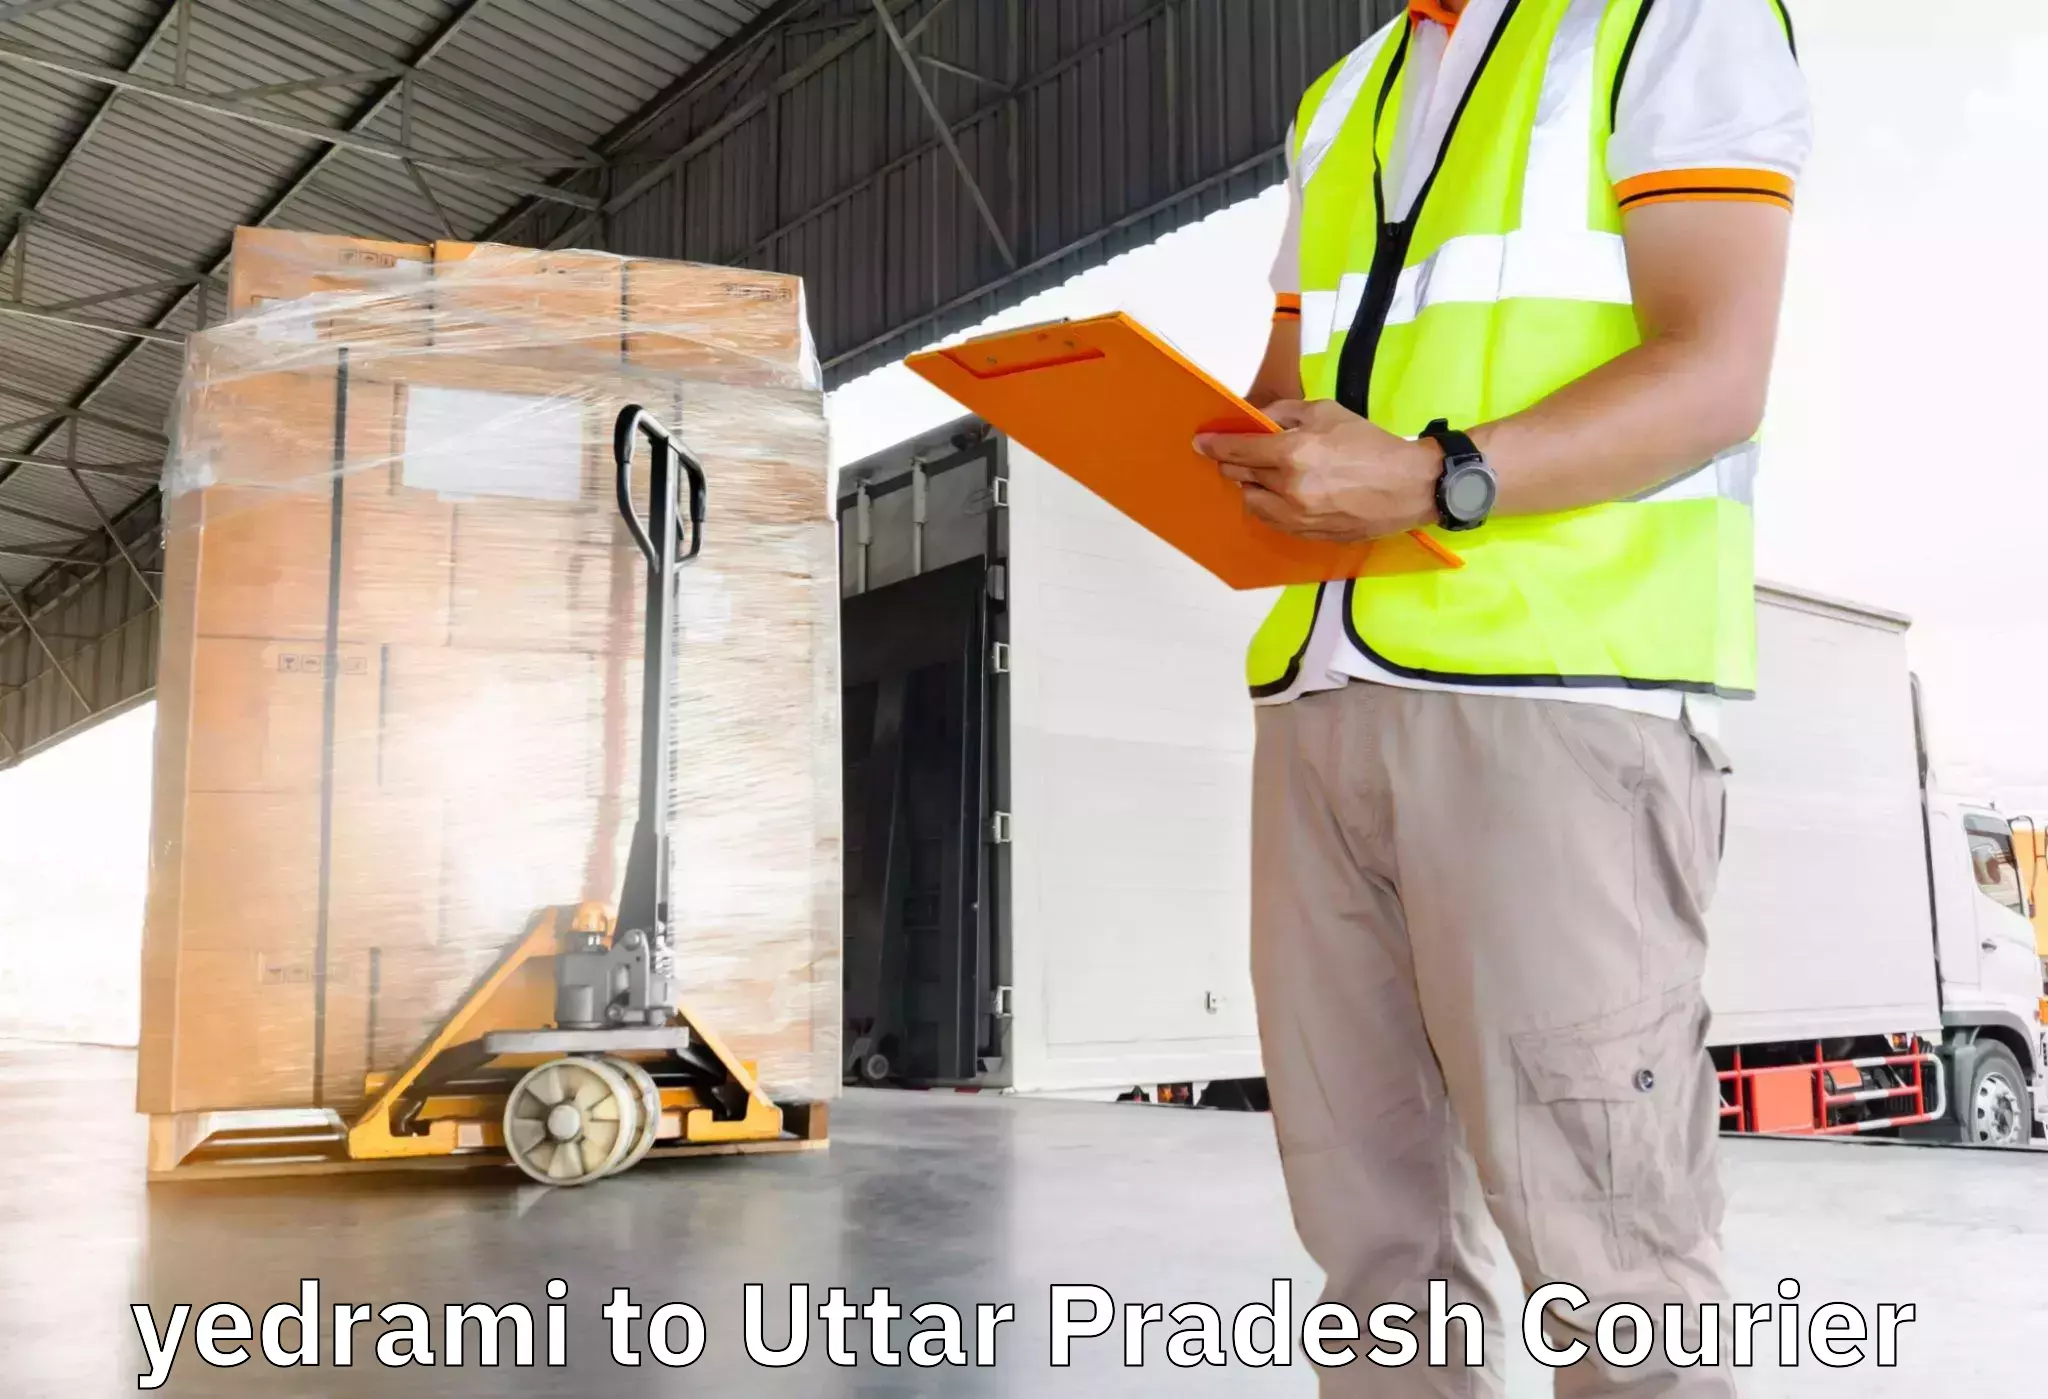 Professional movers and packers yedrami to Rasra